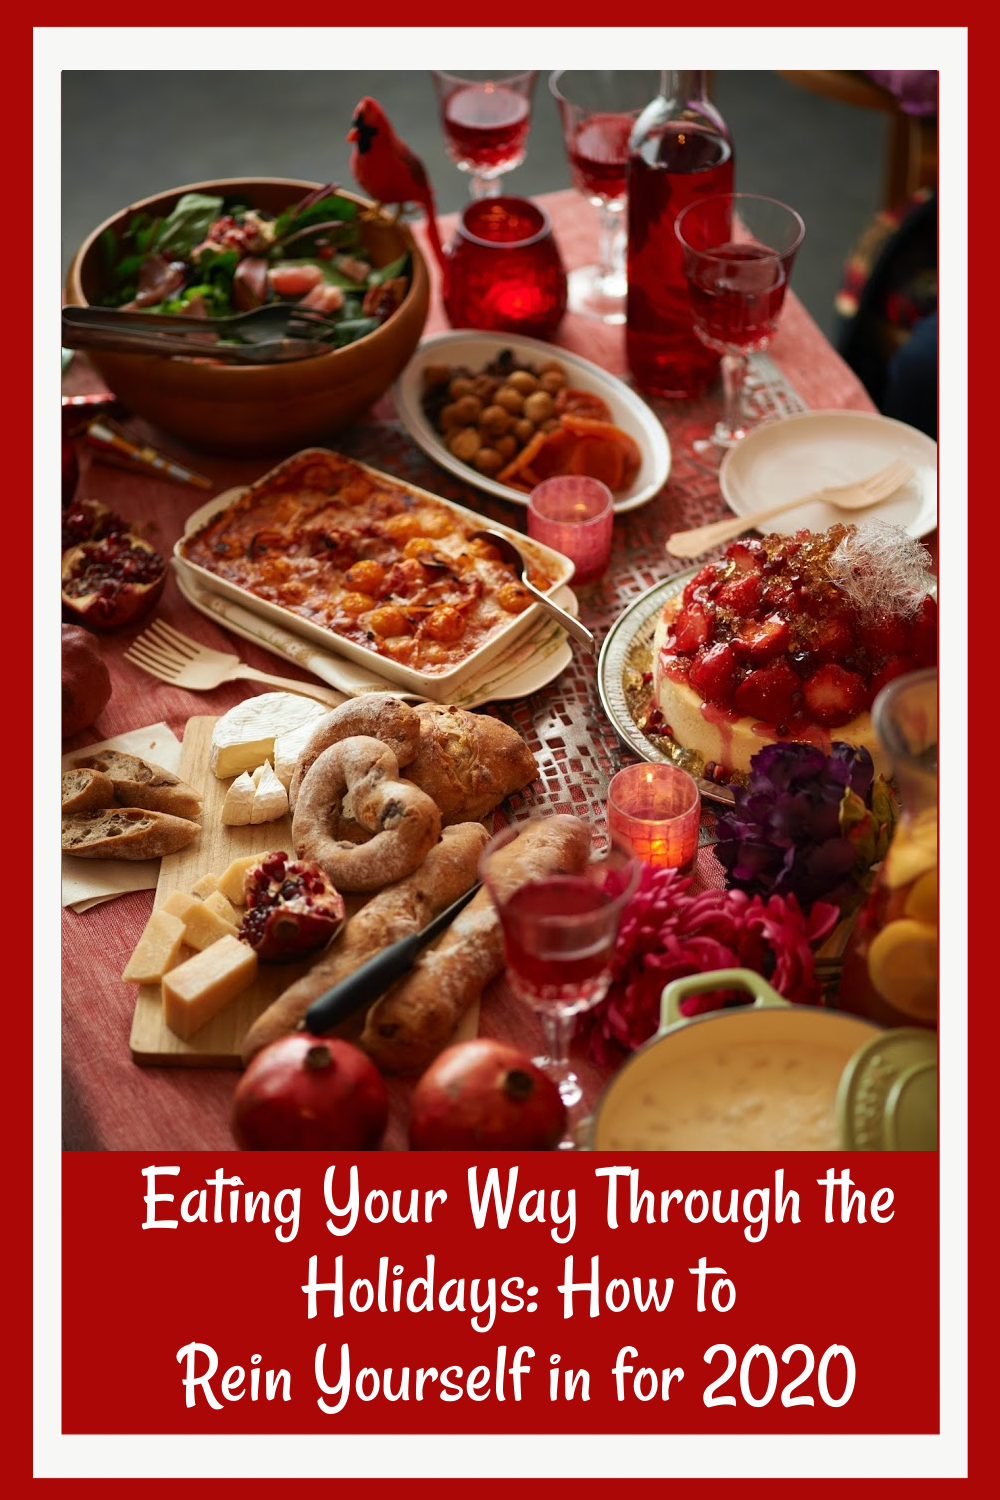 Eating Your Way Through the Holidays: How to Rein Yourself in for 2020